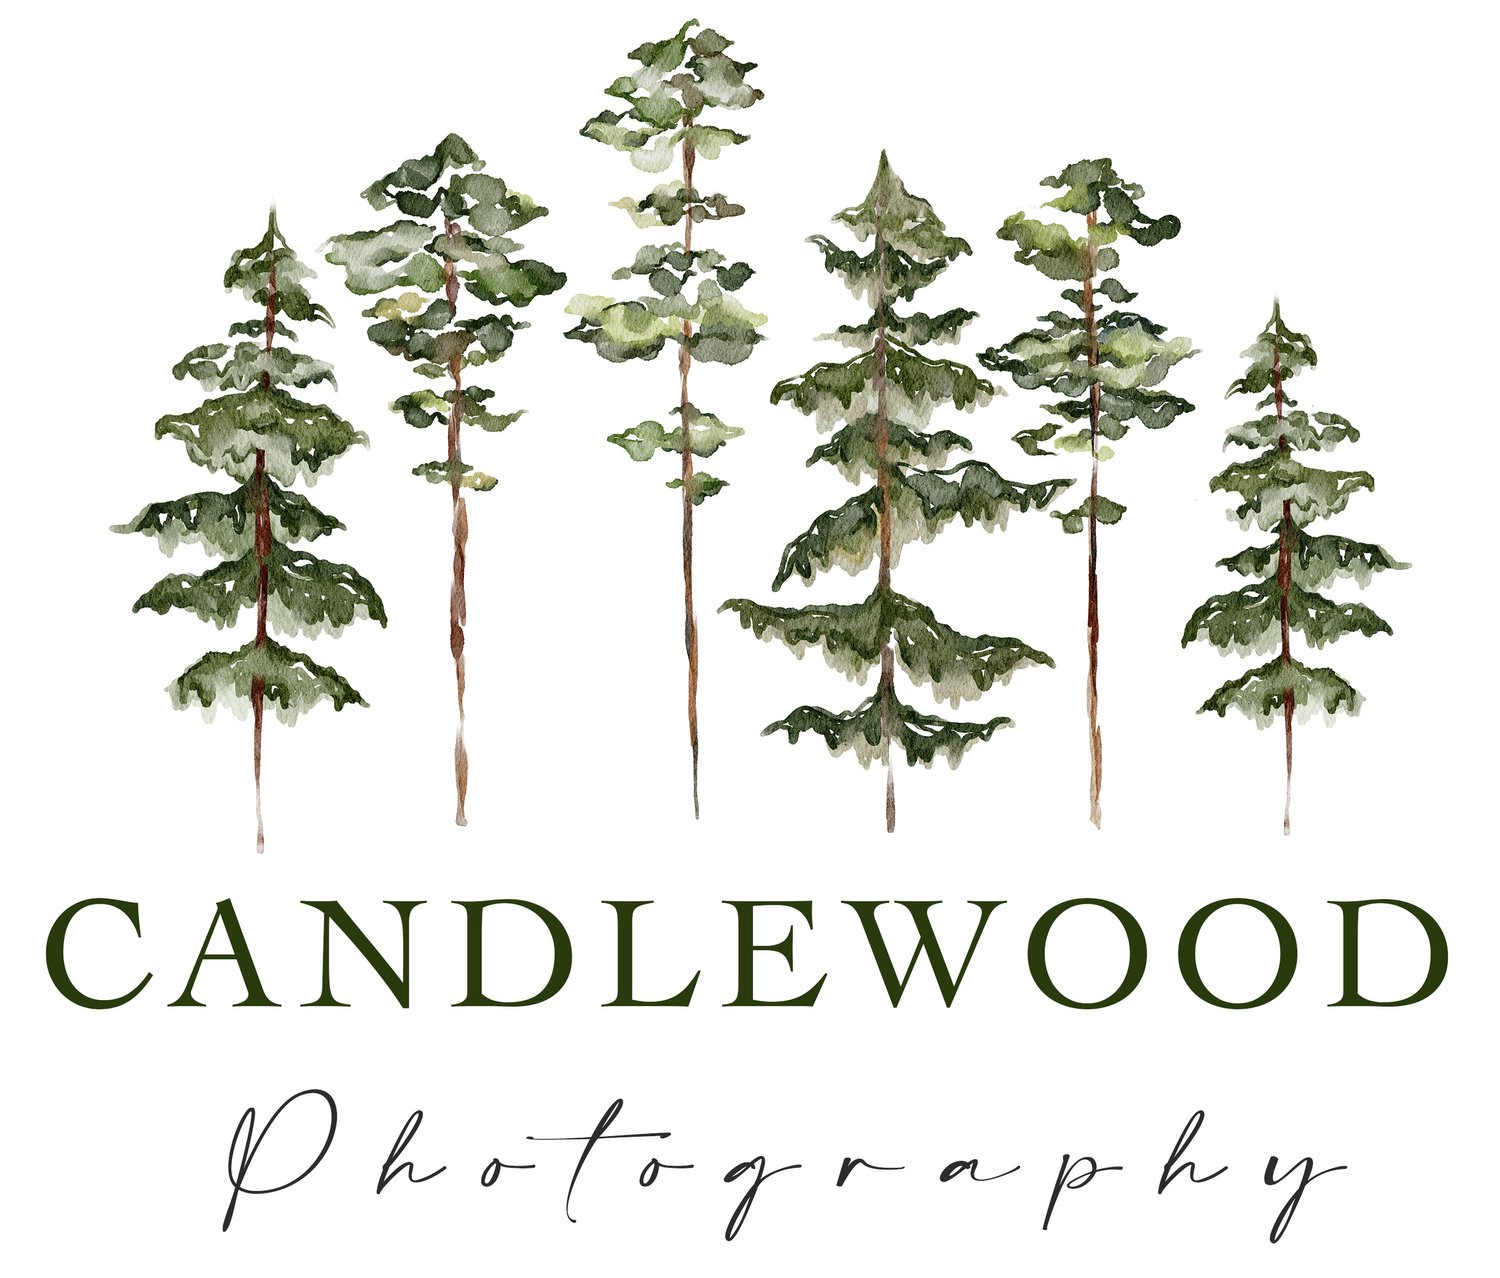 Candlewood Photography